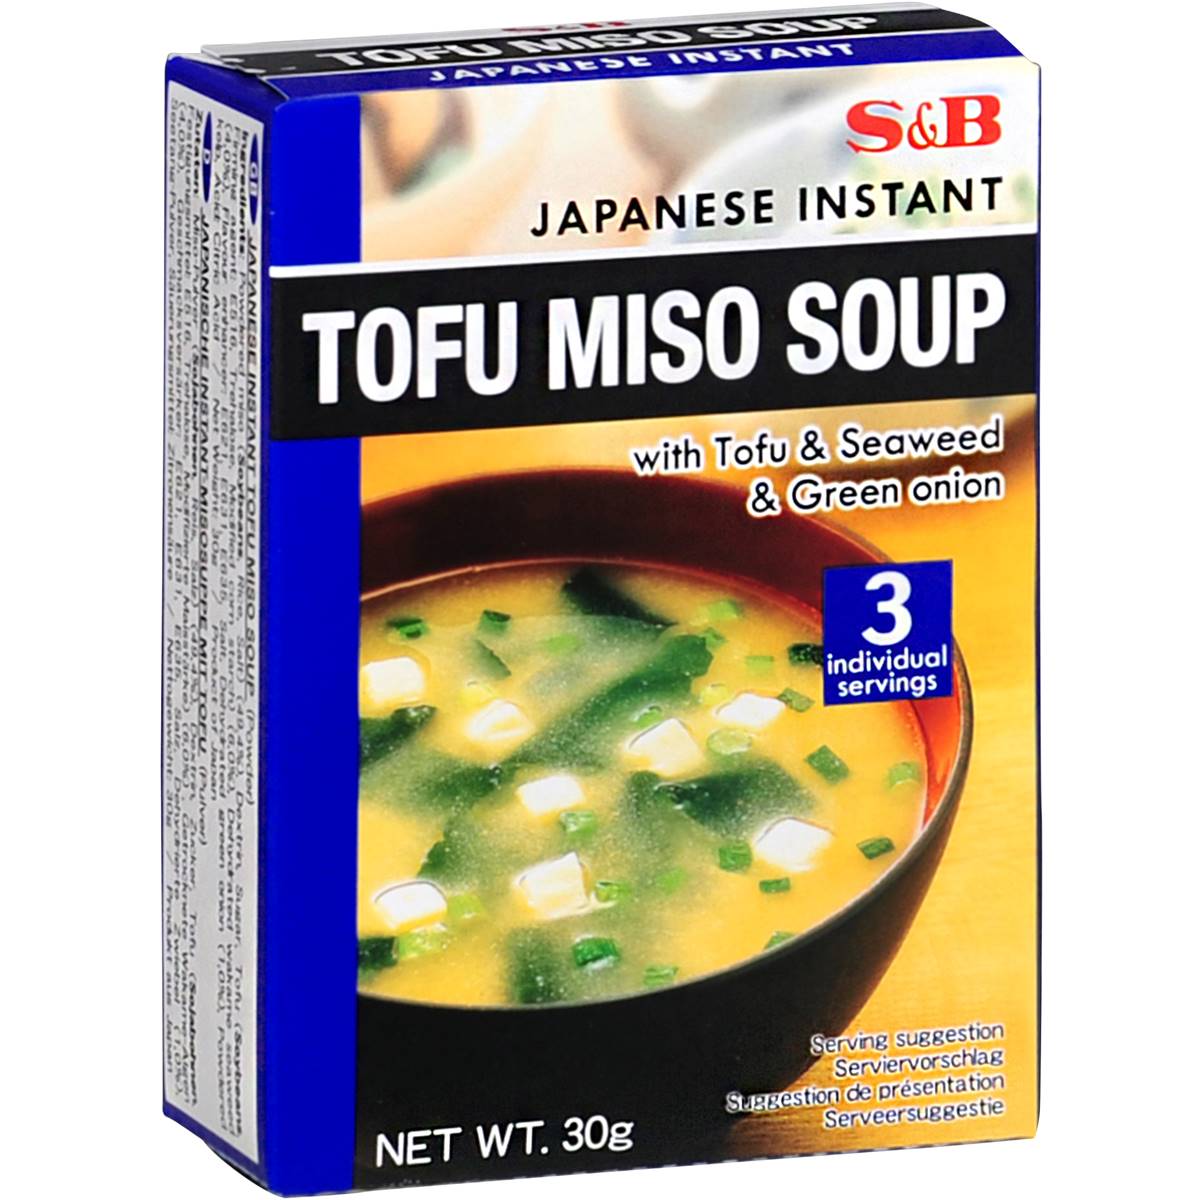 Calories in S&b Miso Soup Tofu